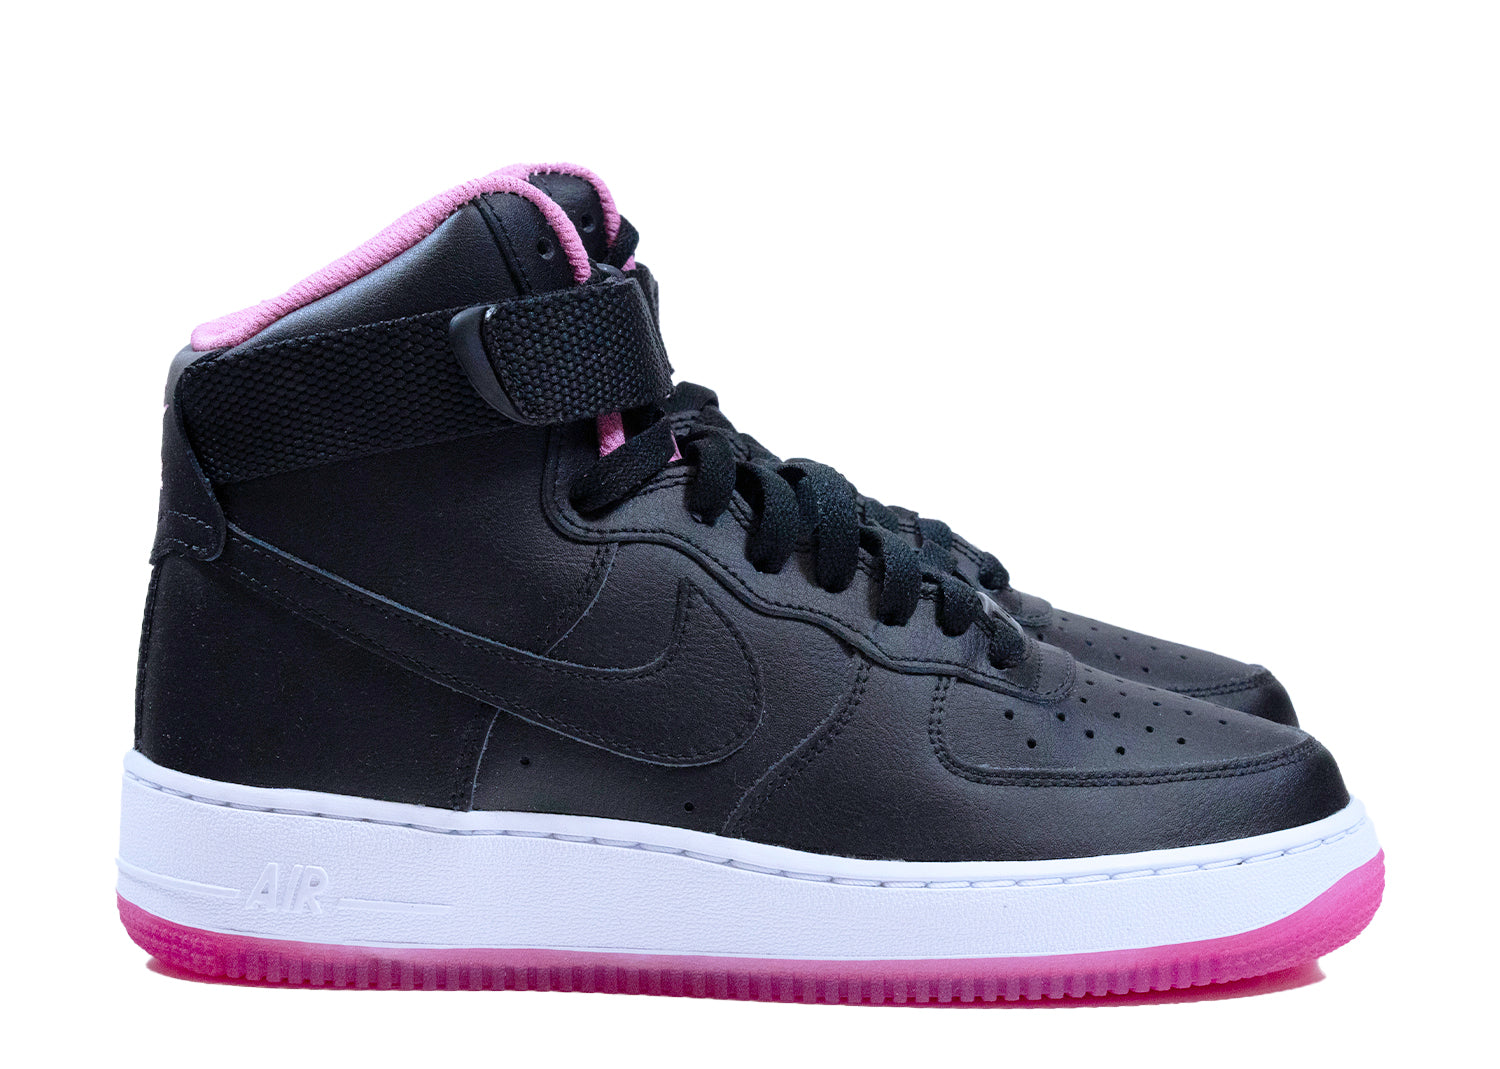 Second Chance - Nike Air bell 1 High ID Black/pink - 38,5 | NEW